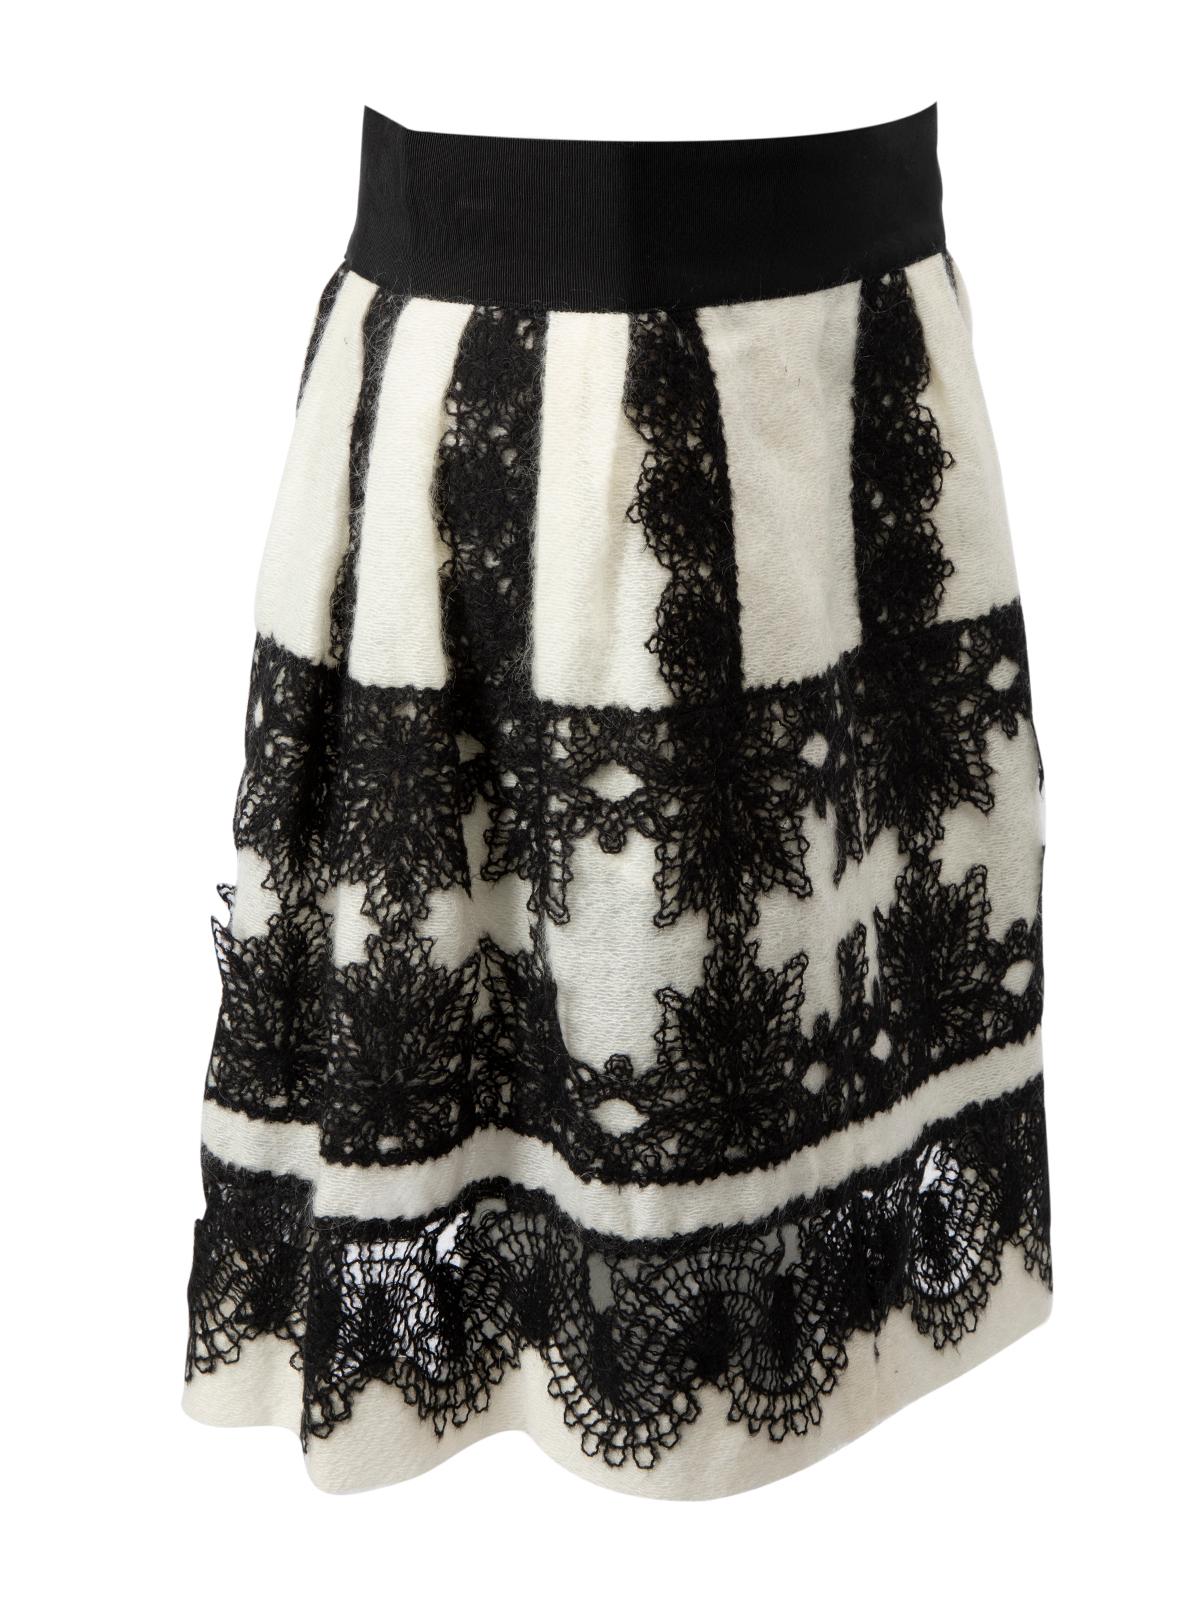 CONDITION is Very good. Hardly any visible wear to skirt is evident. Pilling to outer fabric can be seen on this used Alberta Ferreti designer resale item. Details Multicolour- Black and cream Synthetic Flared skirt Knee length Webby crochet design